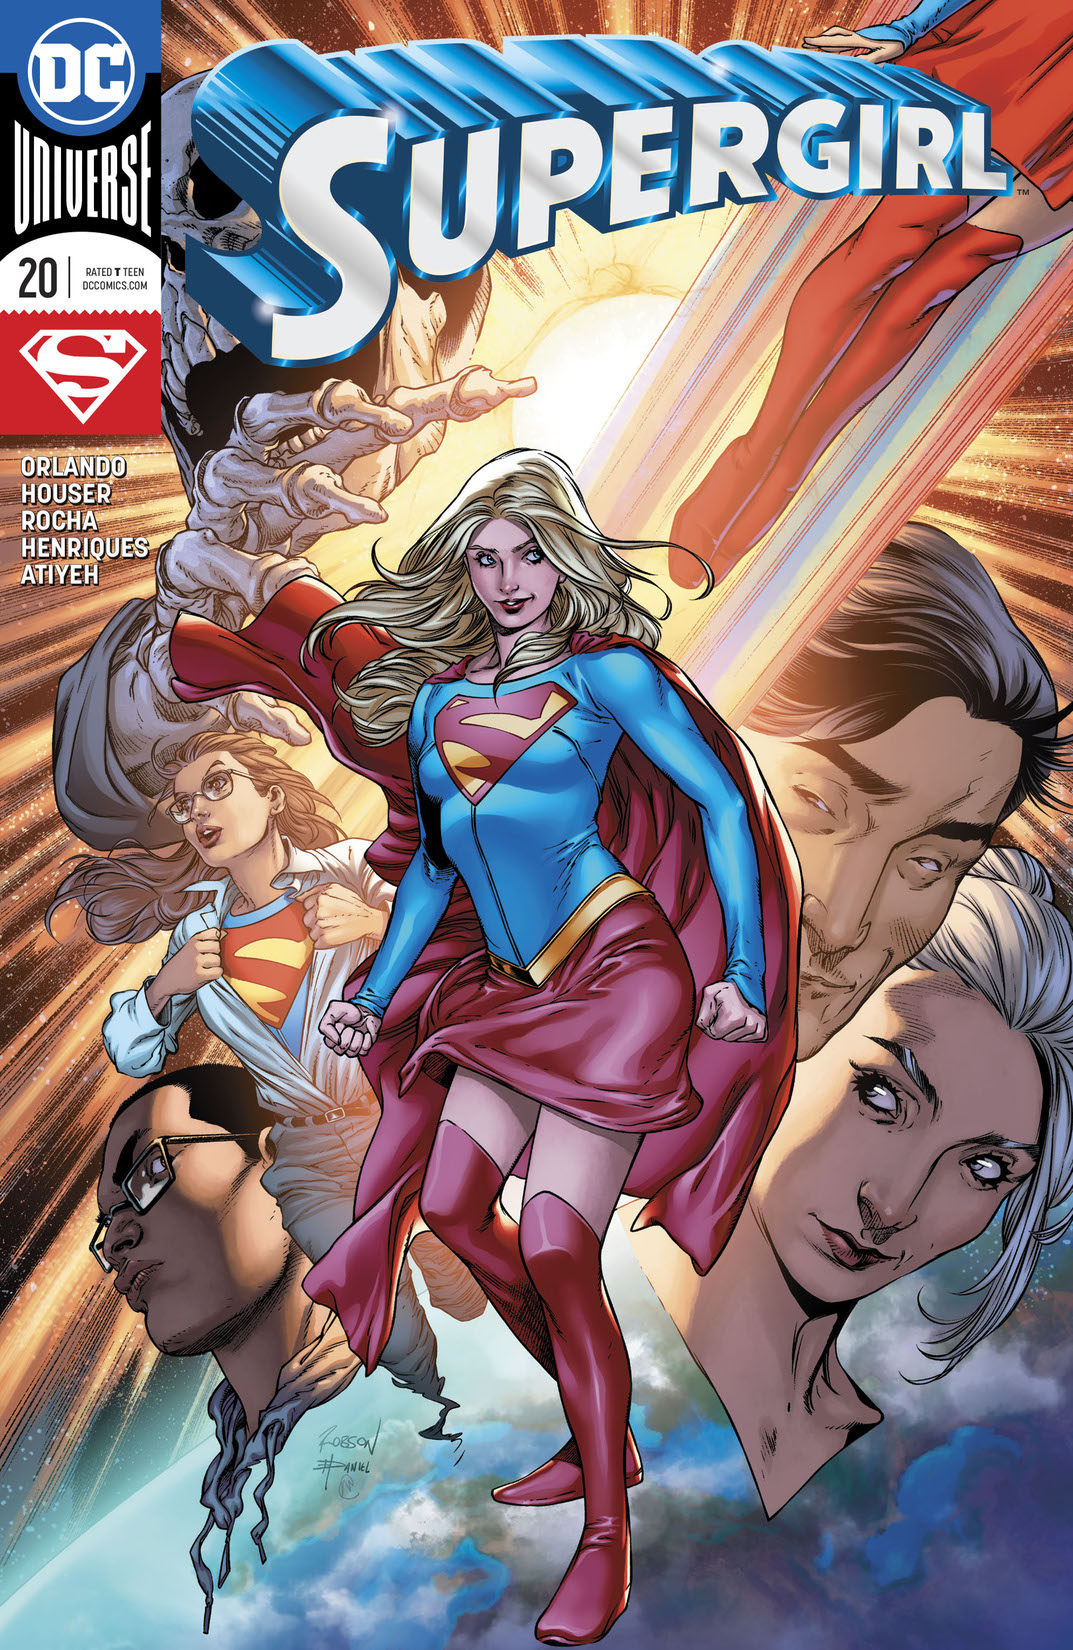 Supergirl (2016-) #20 preview images